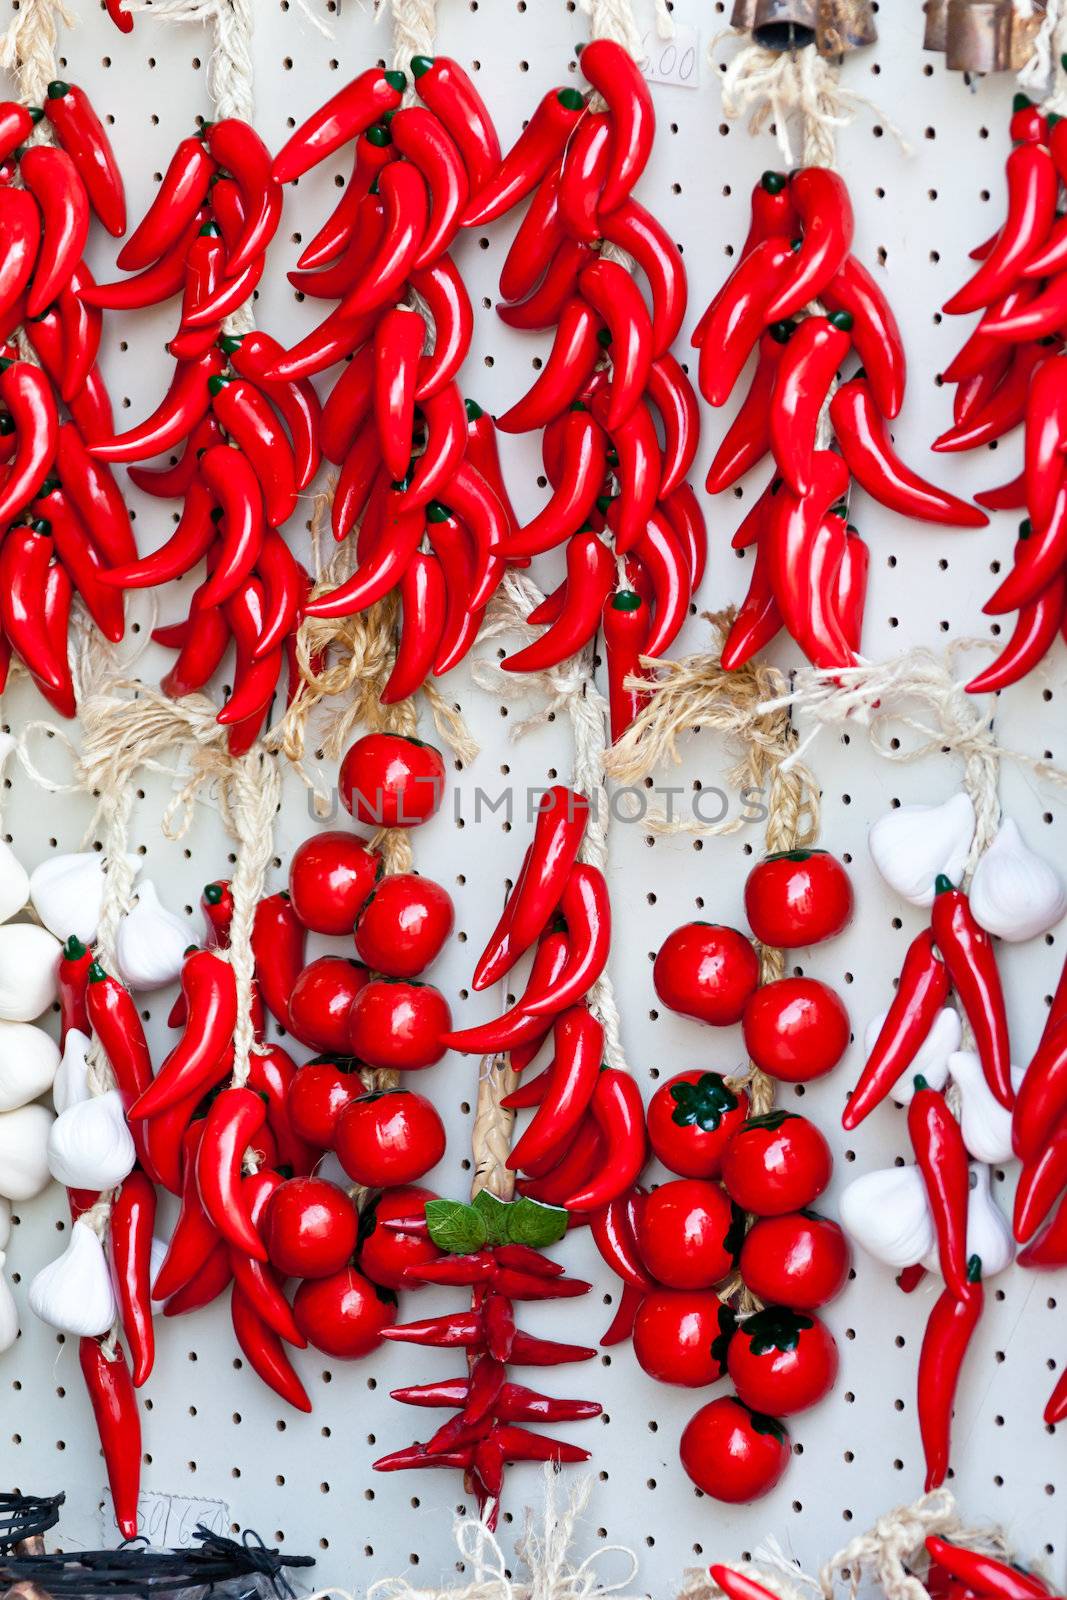 Red Hanged peppers by dario_lo_presti